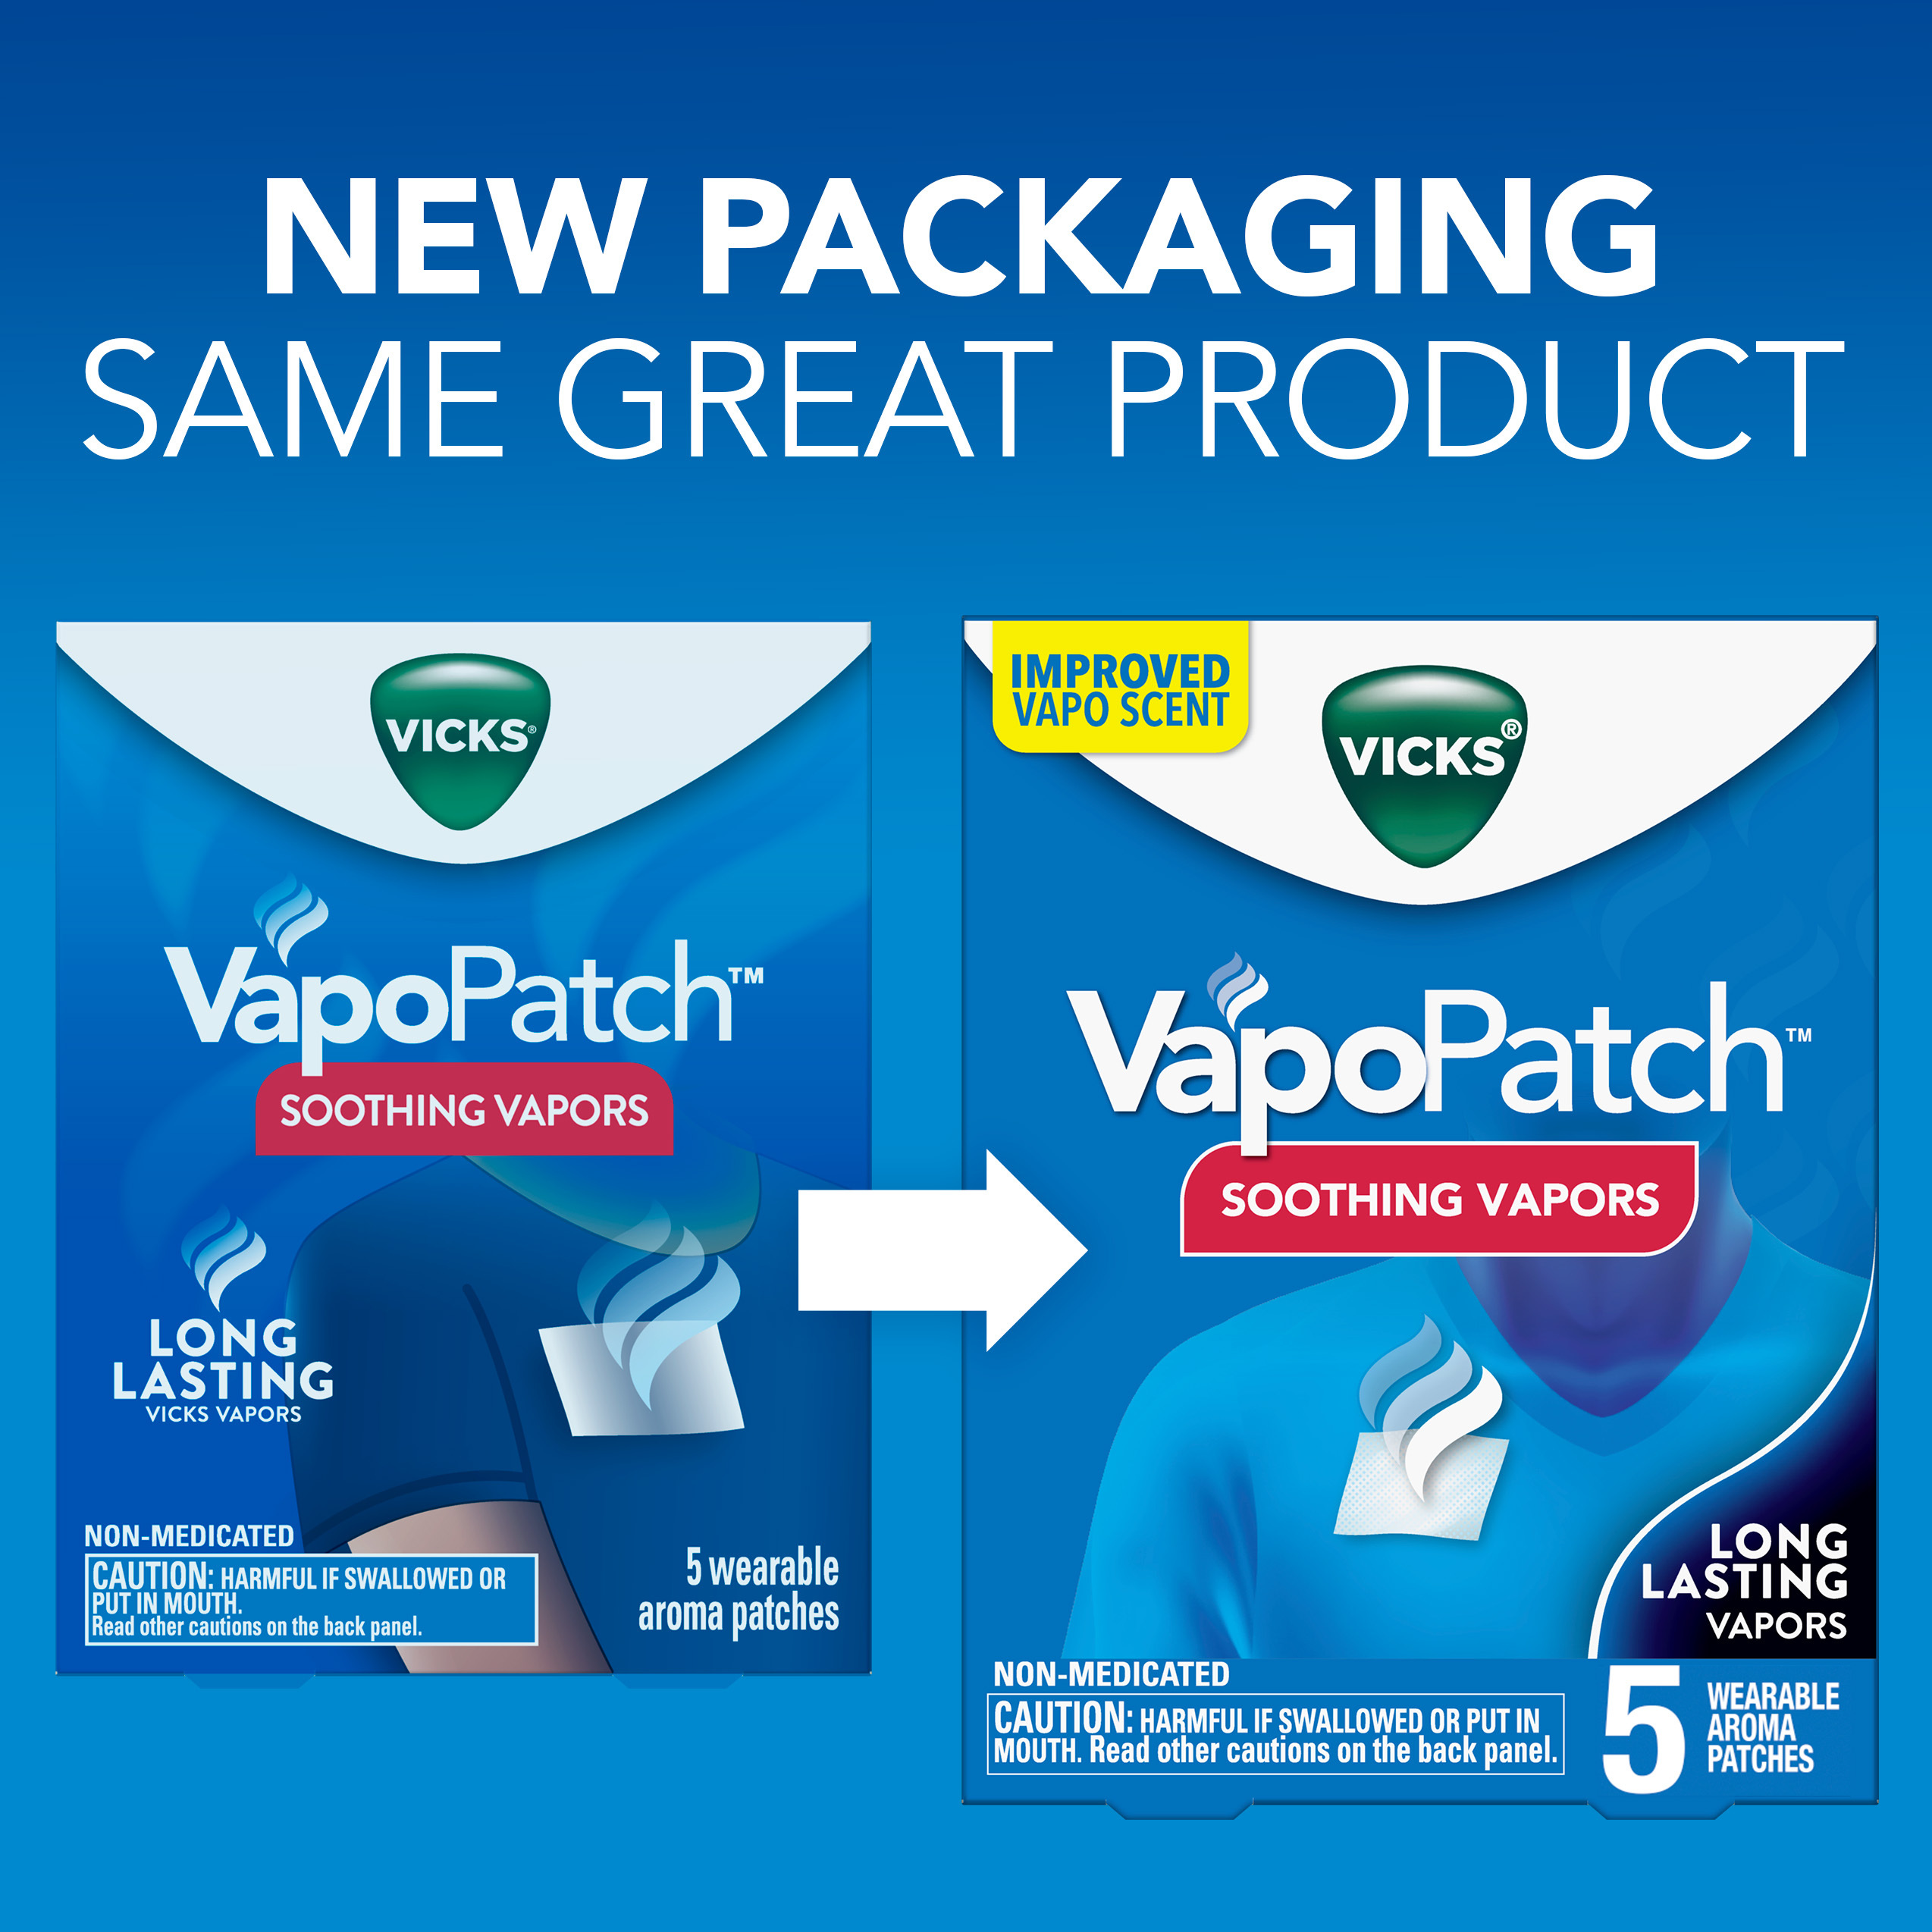 Vicks VapoPatch, Non-Medicated Wearable Arome Patch, Long Lasting Soothing Vicks Vapors, 5 Ct - image 2 of 11